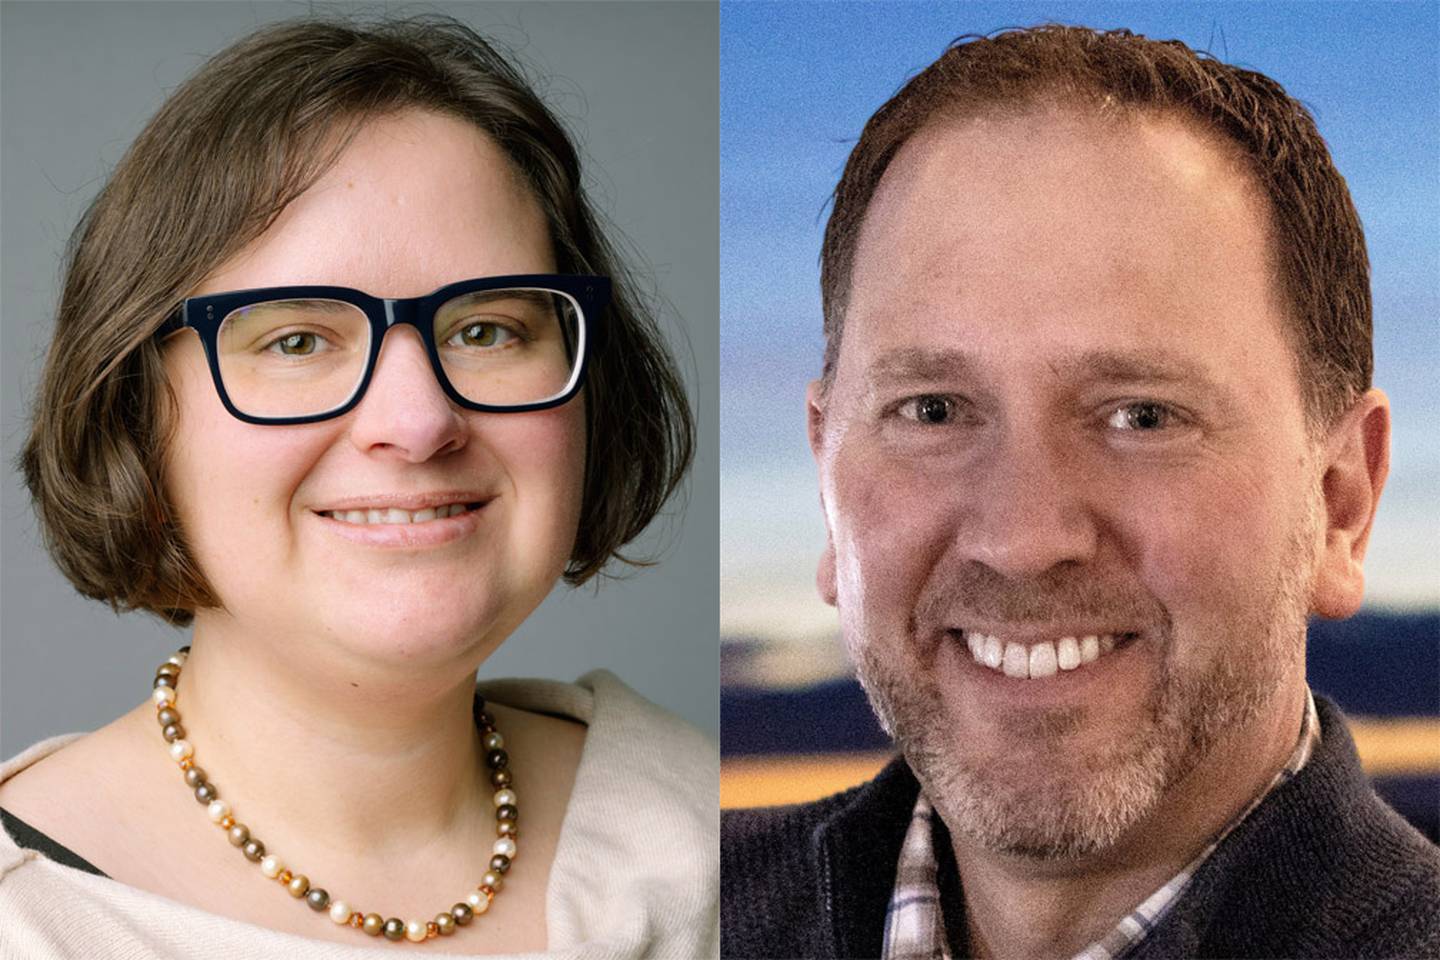 Debate over potential conflict of interest enters West Anchorage Assembly race - Anchorage Daily News